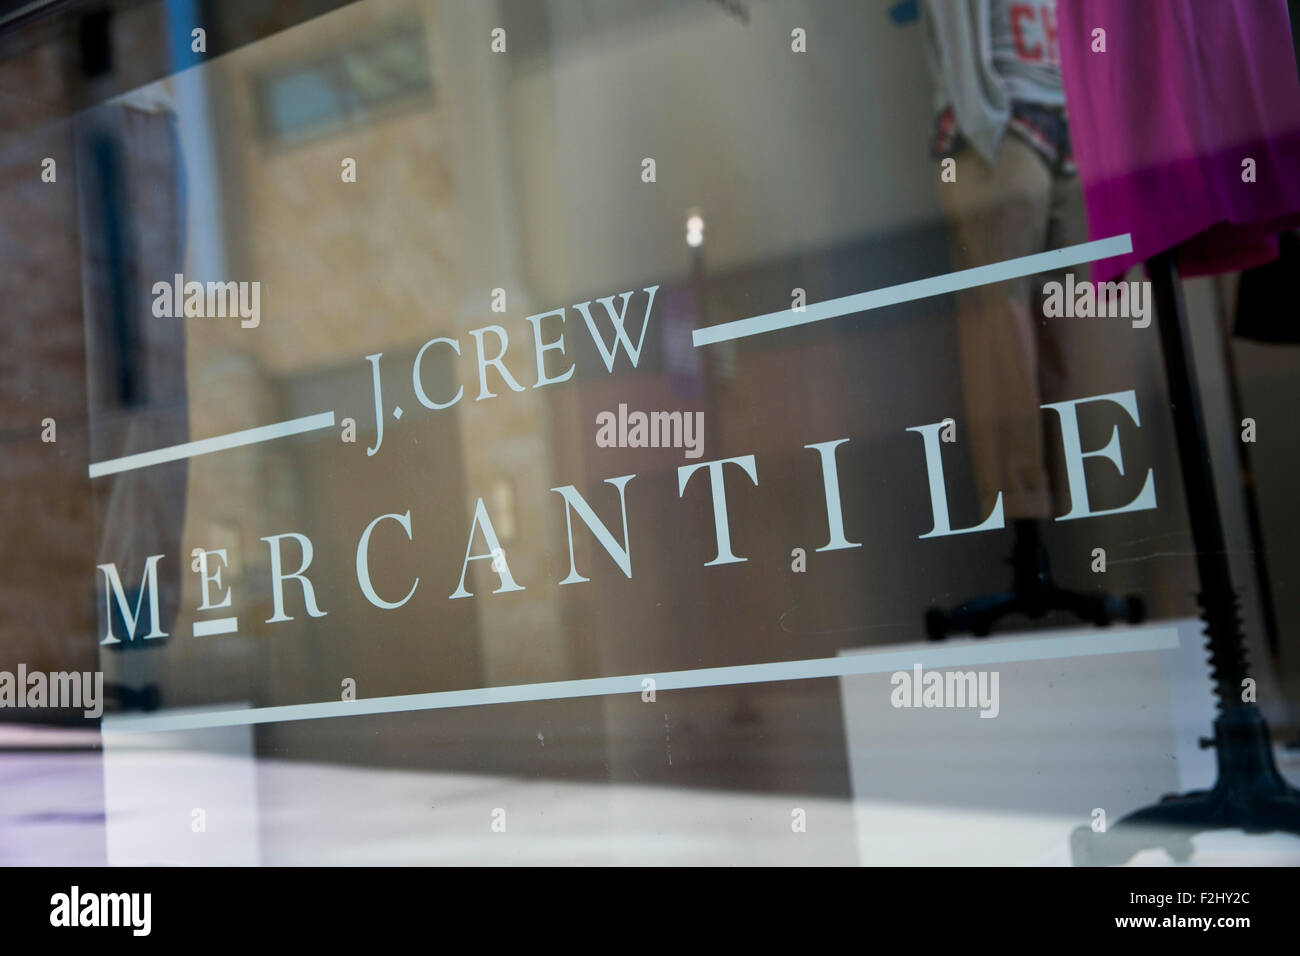 A logo sign outside of a J.Crew Mercantile retail store in Dallas, Texas on September 12, 2015. Stock Photo